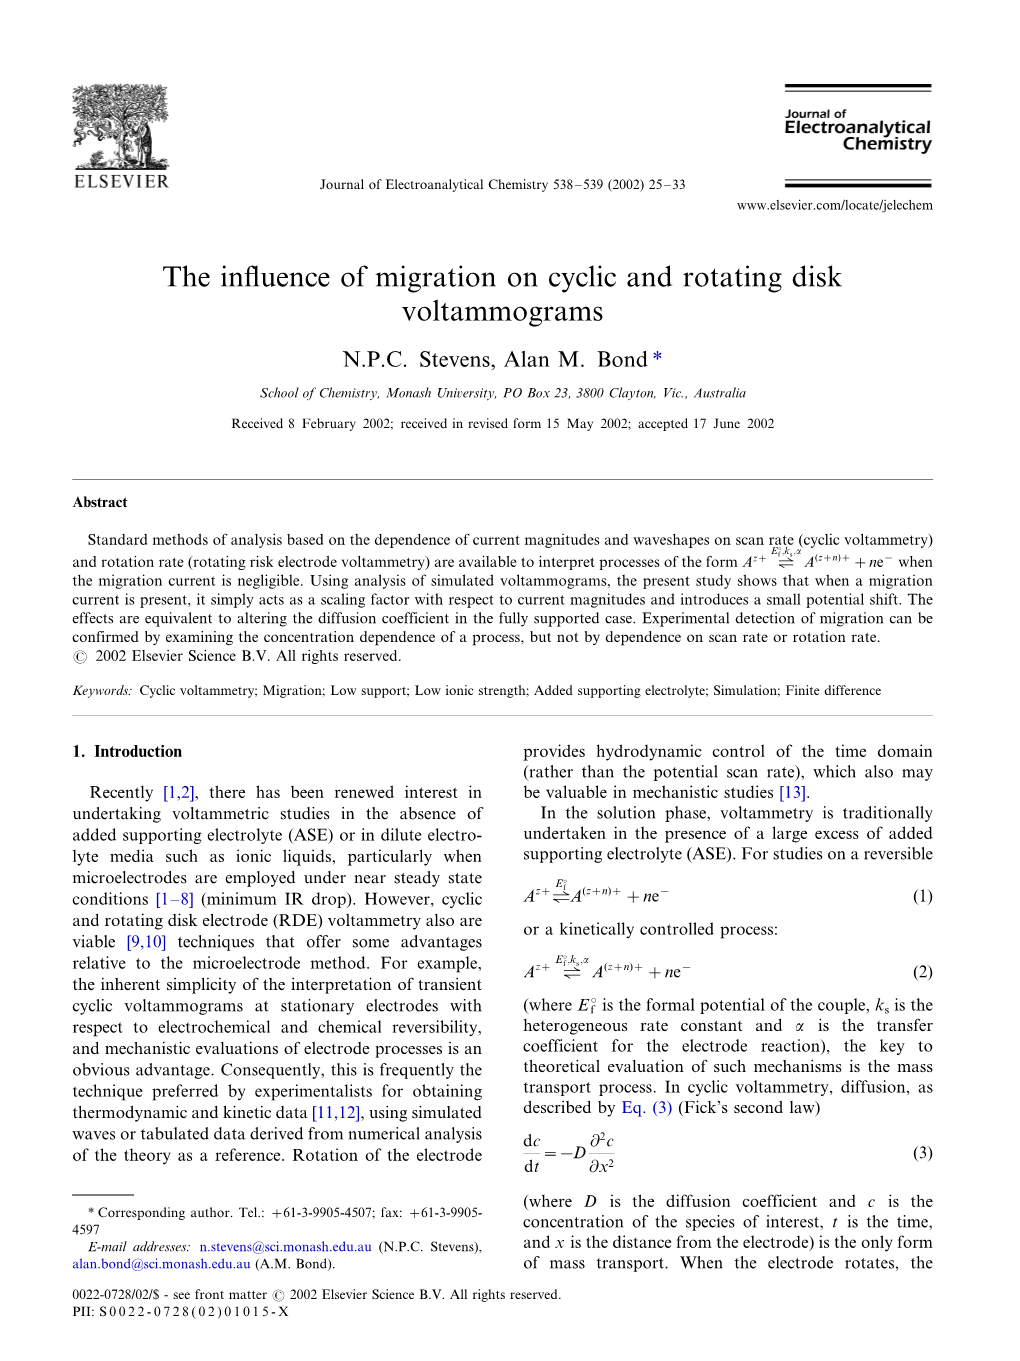 The Influence of Migration on Cyclic and Rotating Disk Voltammograms